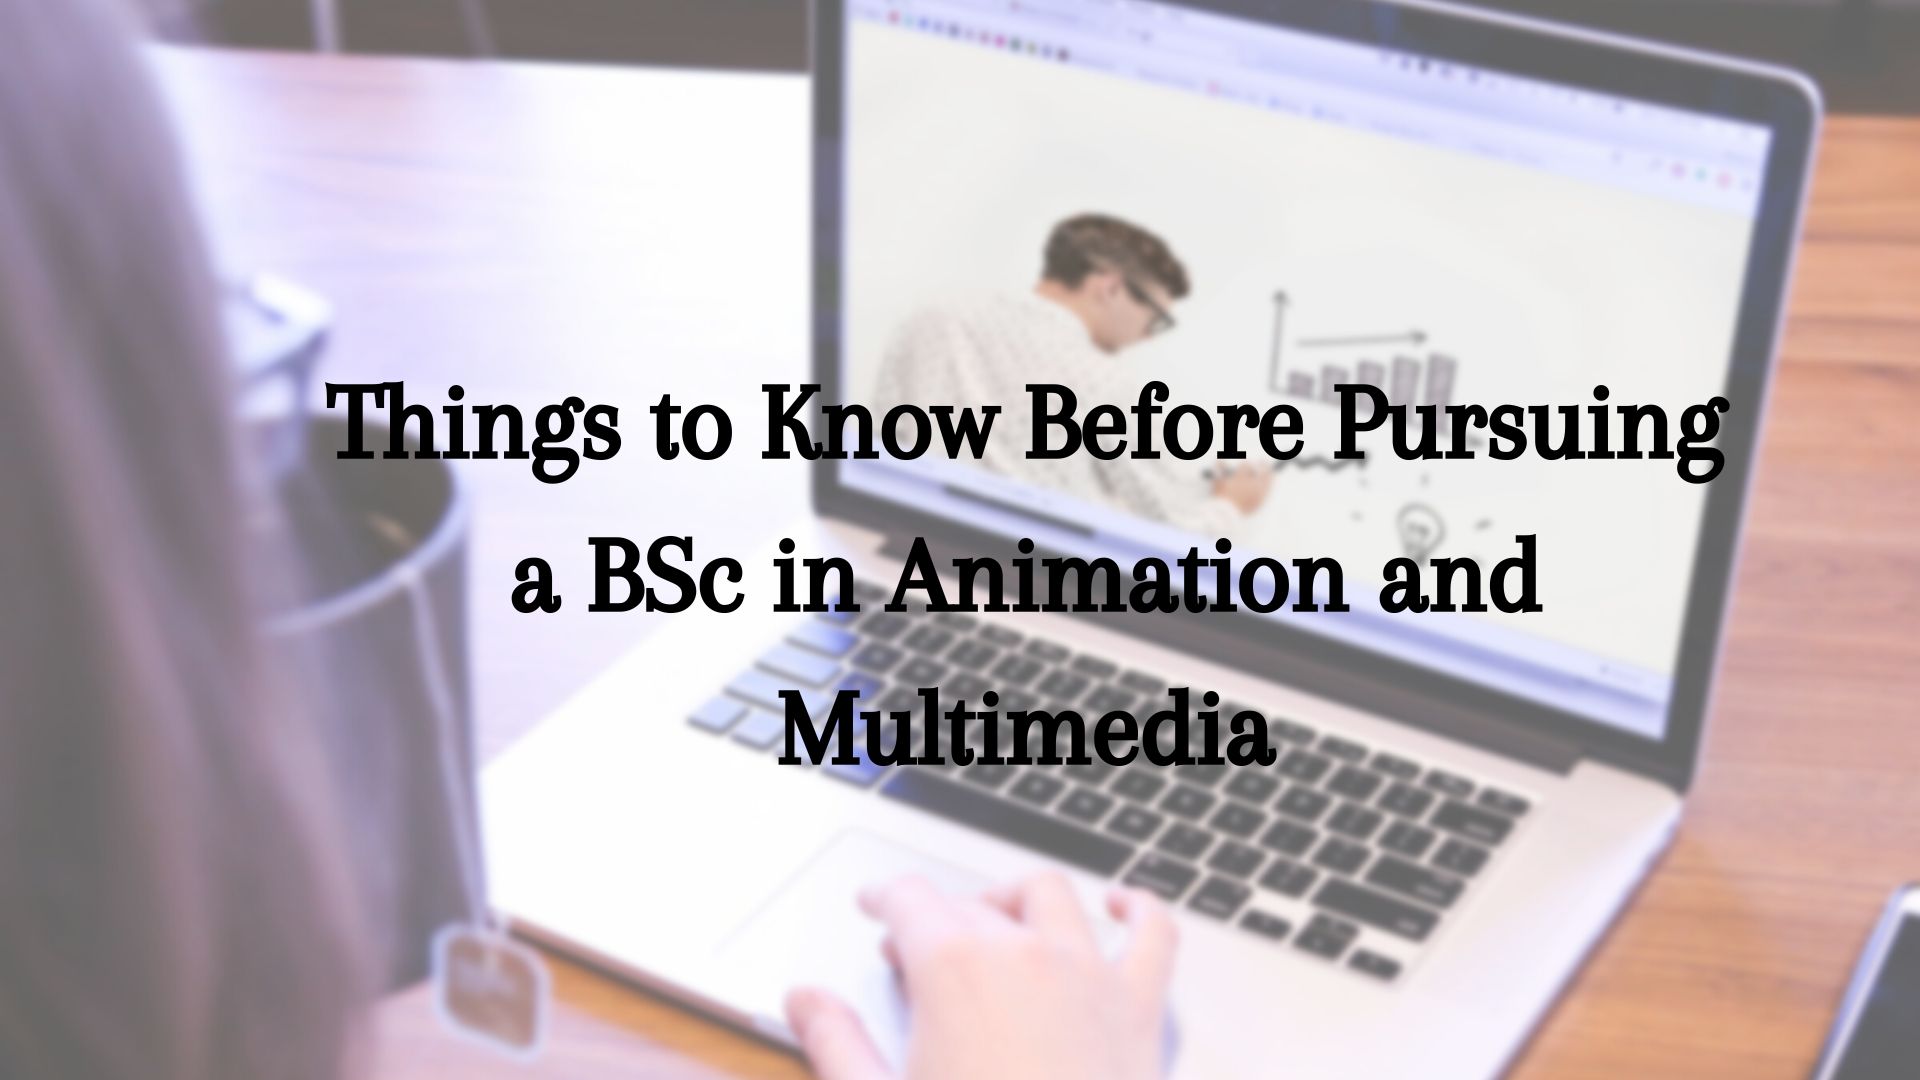 Things to Know Before Pursuing a BSc in Animation and Multimedia